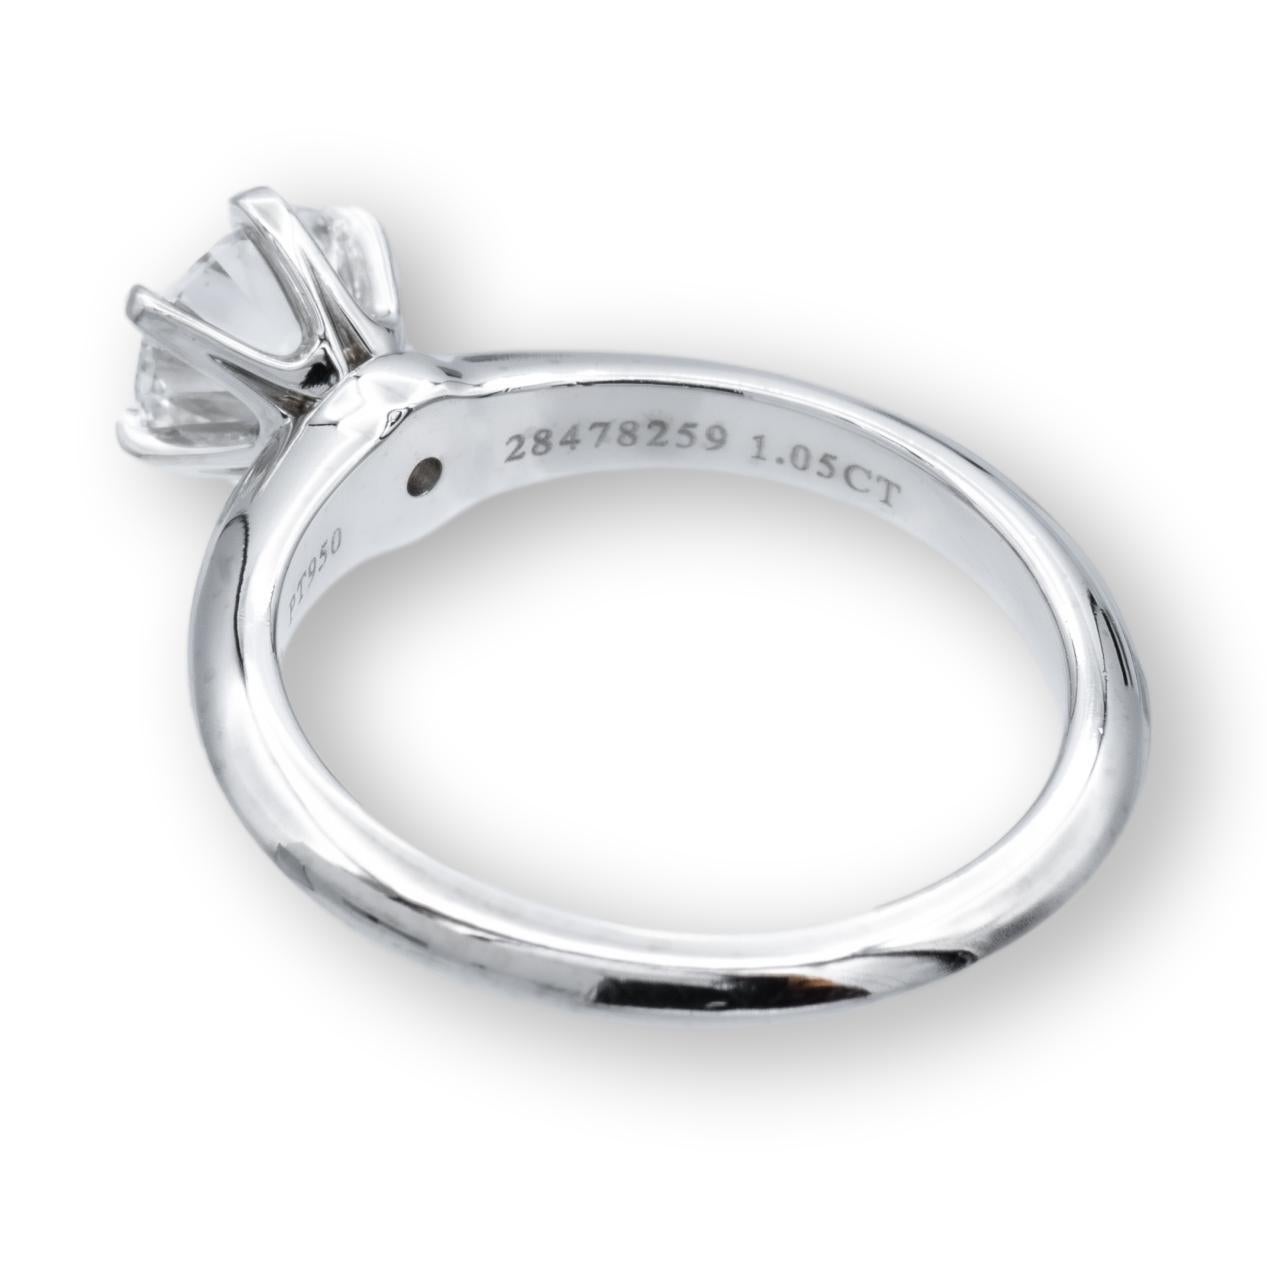 Contemporary Tiffany and Co. Platinum Solitaire Round Diamond Engagement Ring 1.05 FVS2 For Sale